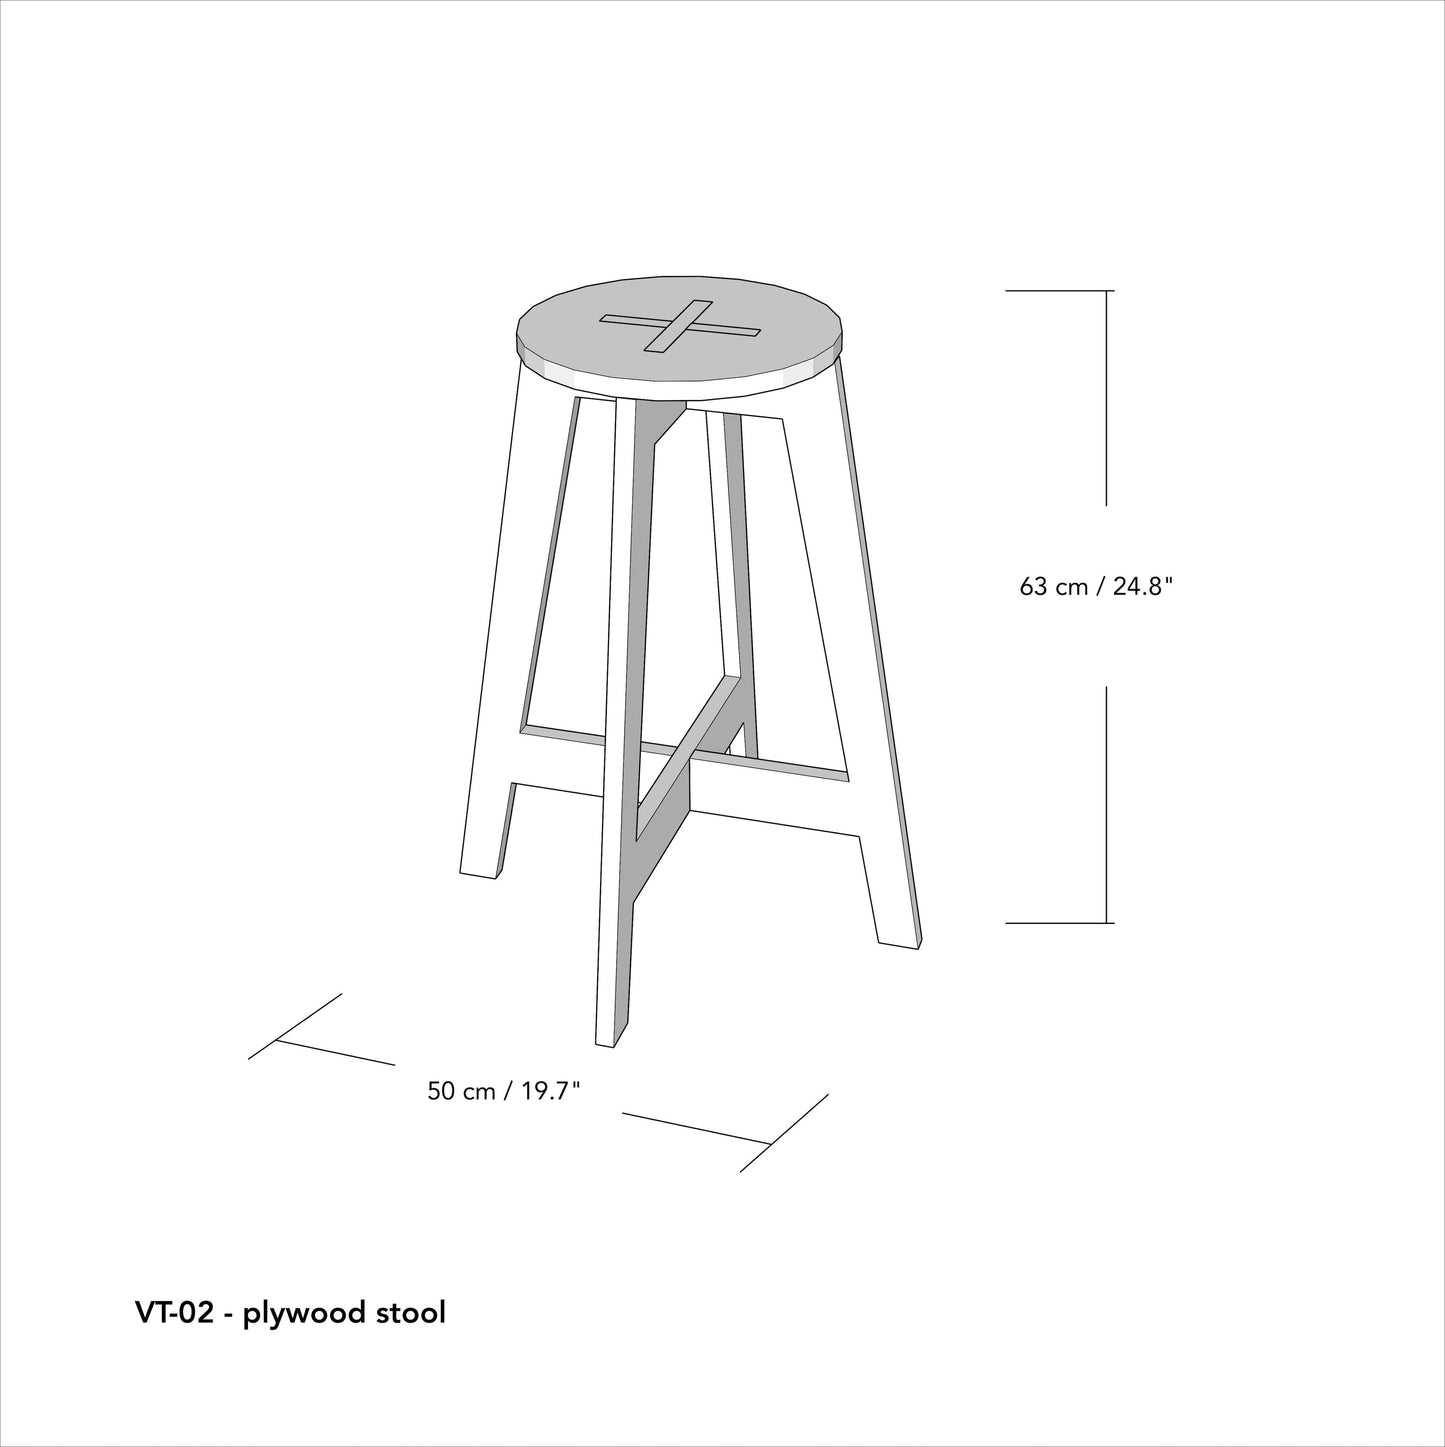 SET Glasgow CF: Checkout stand VC-08-W-CF, shelving VS-03-CF and bar stool in coffee color